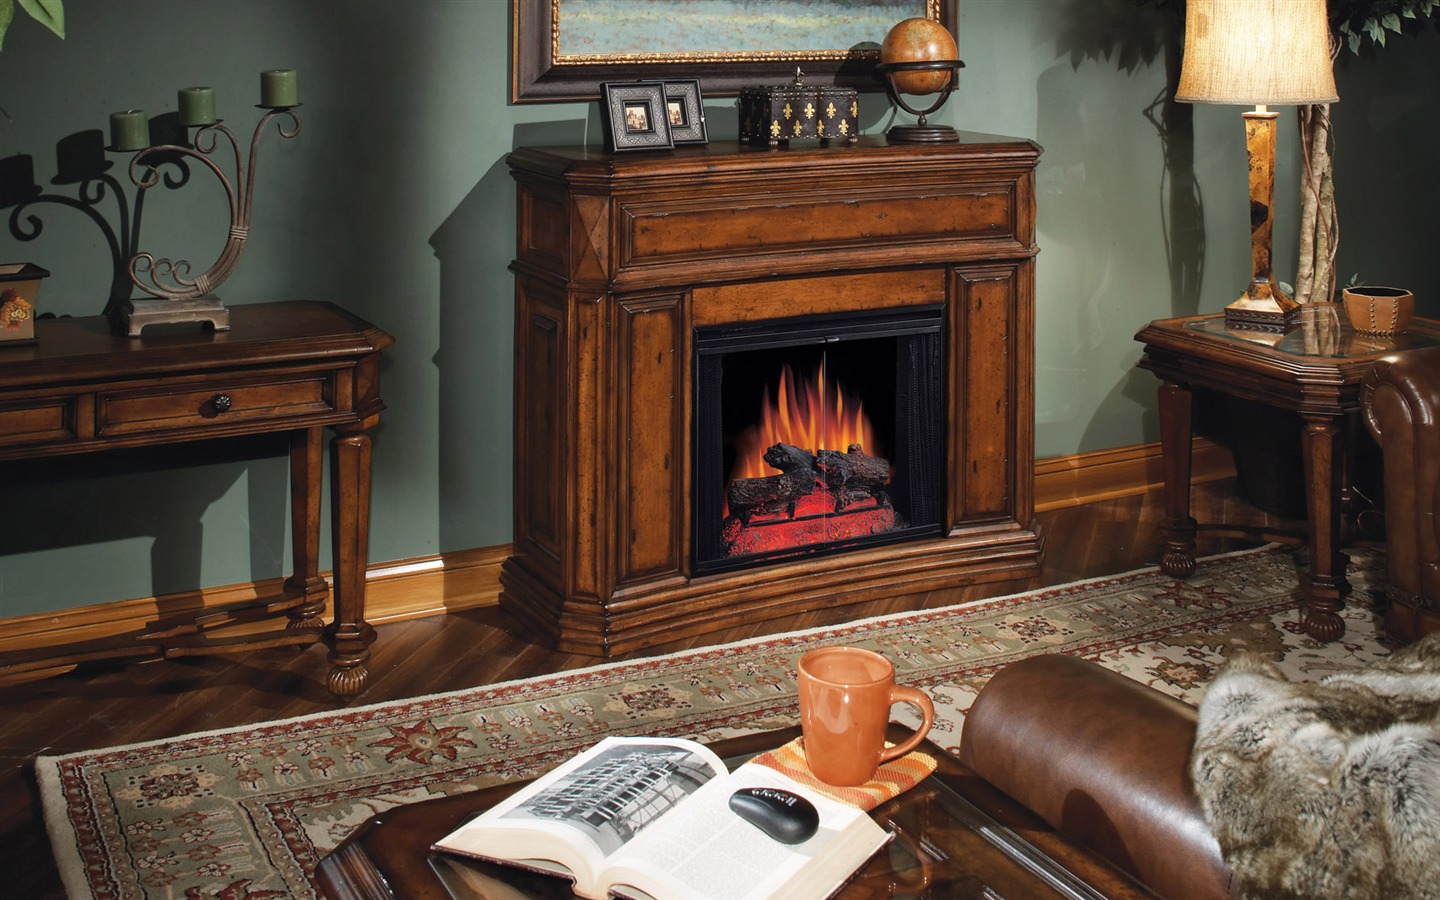 Western-style family fireplace wallpaper (1) #6 - 1440x900